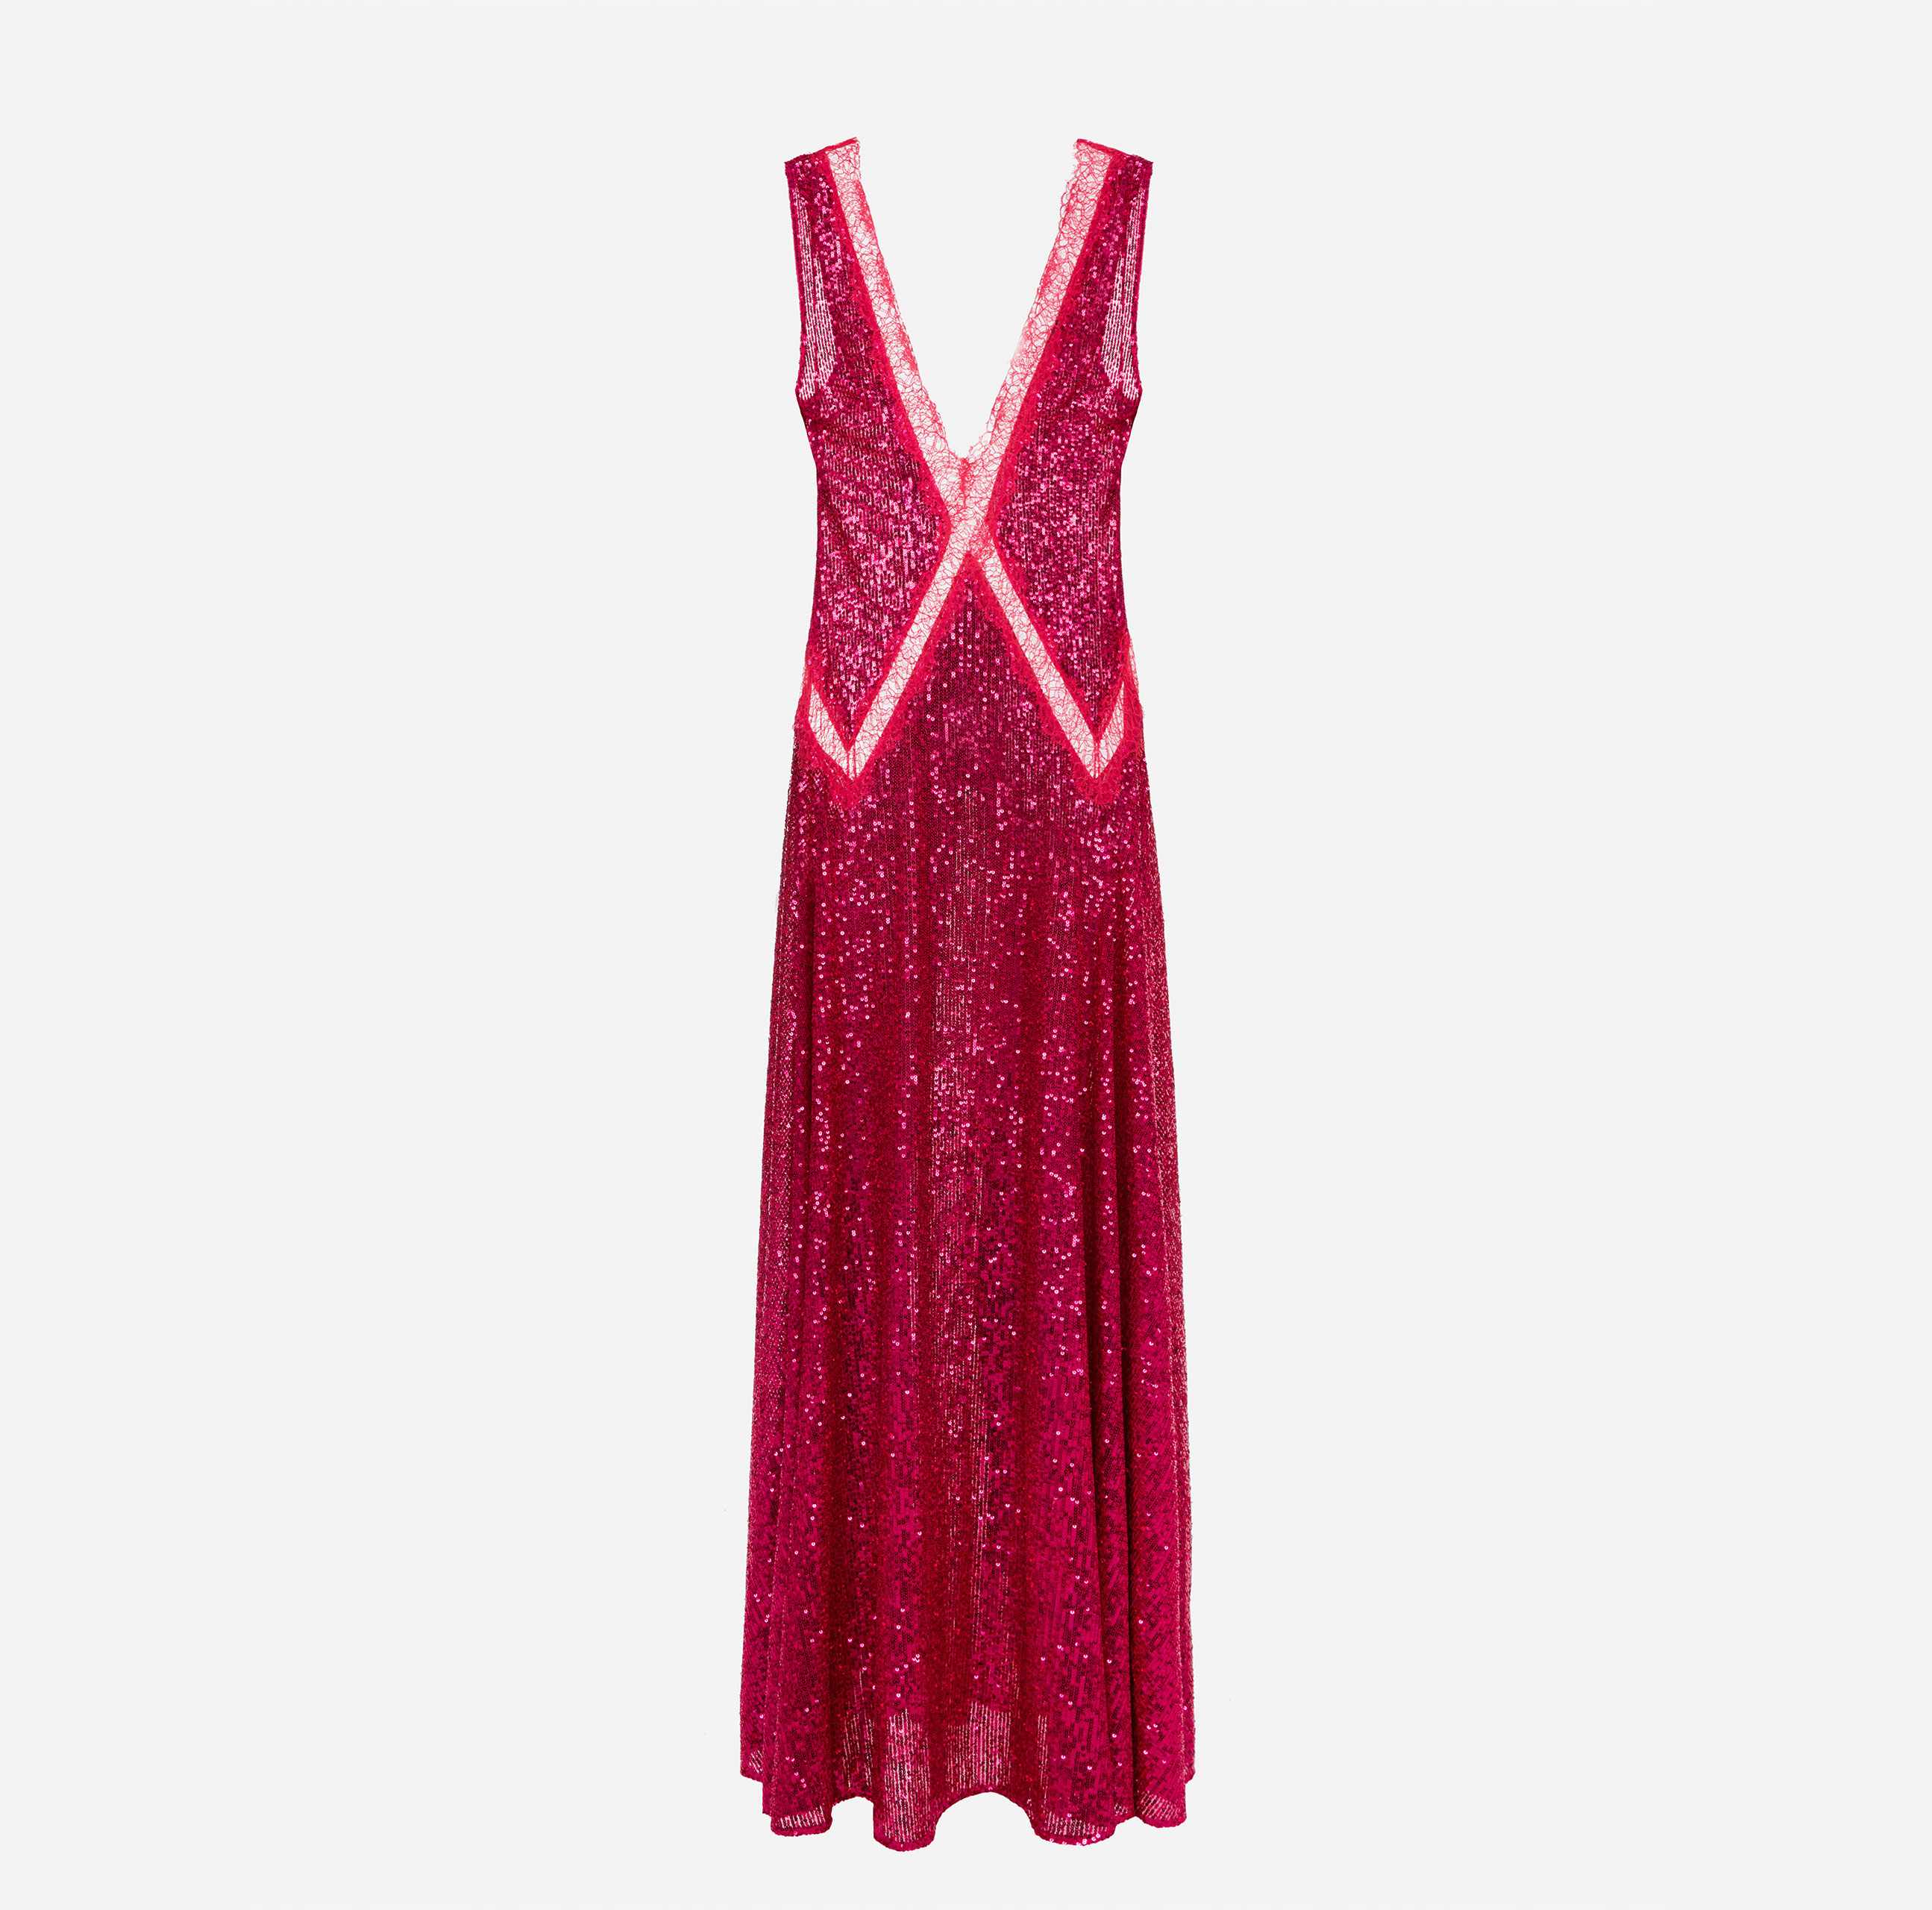 Red carpet dress with inserts in lace and sequin fabric - ABBIGLIAMENTO - Elisabetta Franchi